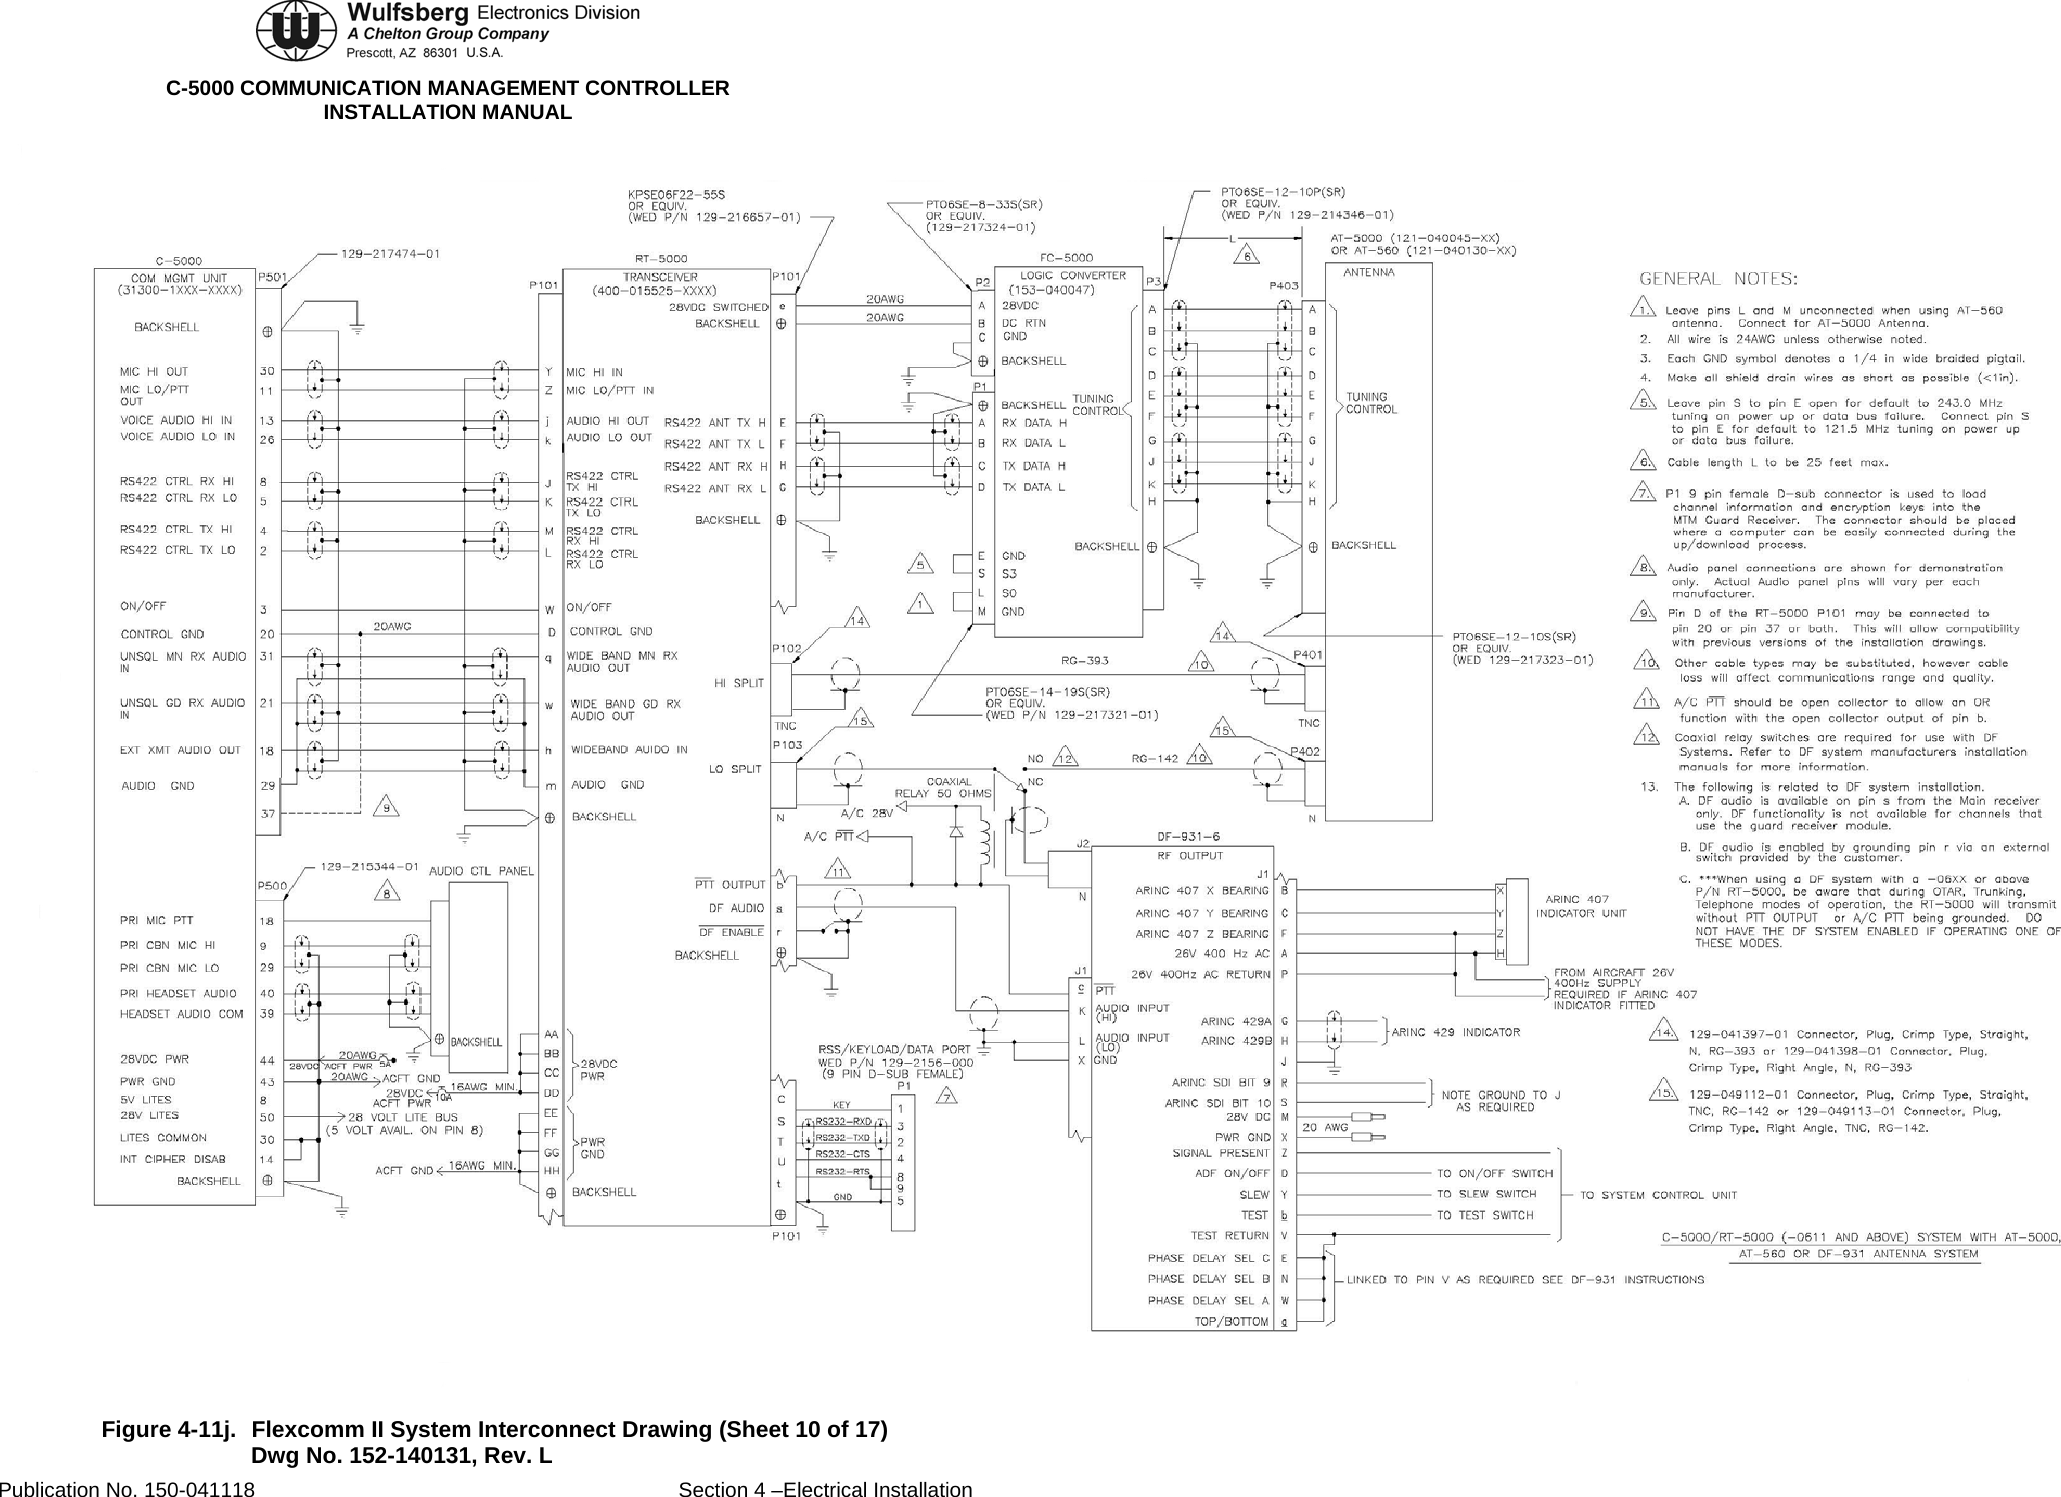  C-5000 COMMUNICATION MANAGEMENT CONTROLLER INSTALLATION MANUAL  Figure 4-11j.  Flexcomm II System Interconnect Drawing (Sheet 10 of 17) Dwg No. 152-140131, Rev. L Publication No. 150-041118  Section 4 –Electrical Installation 